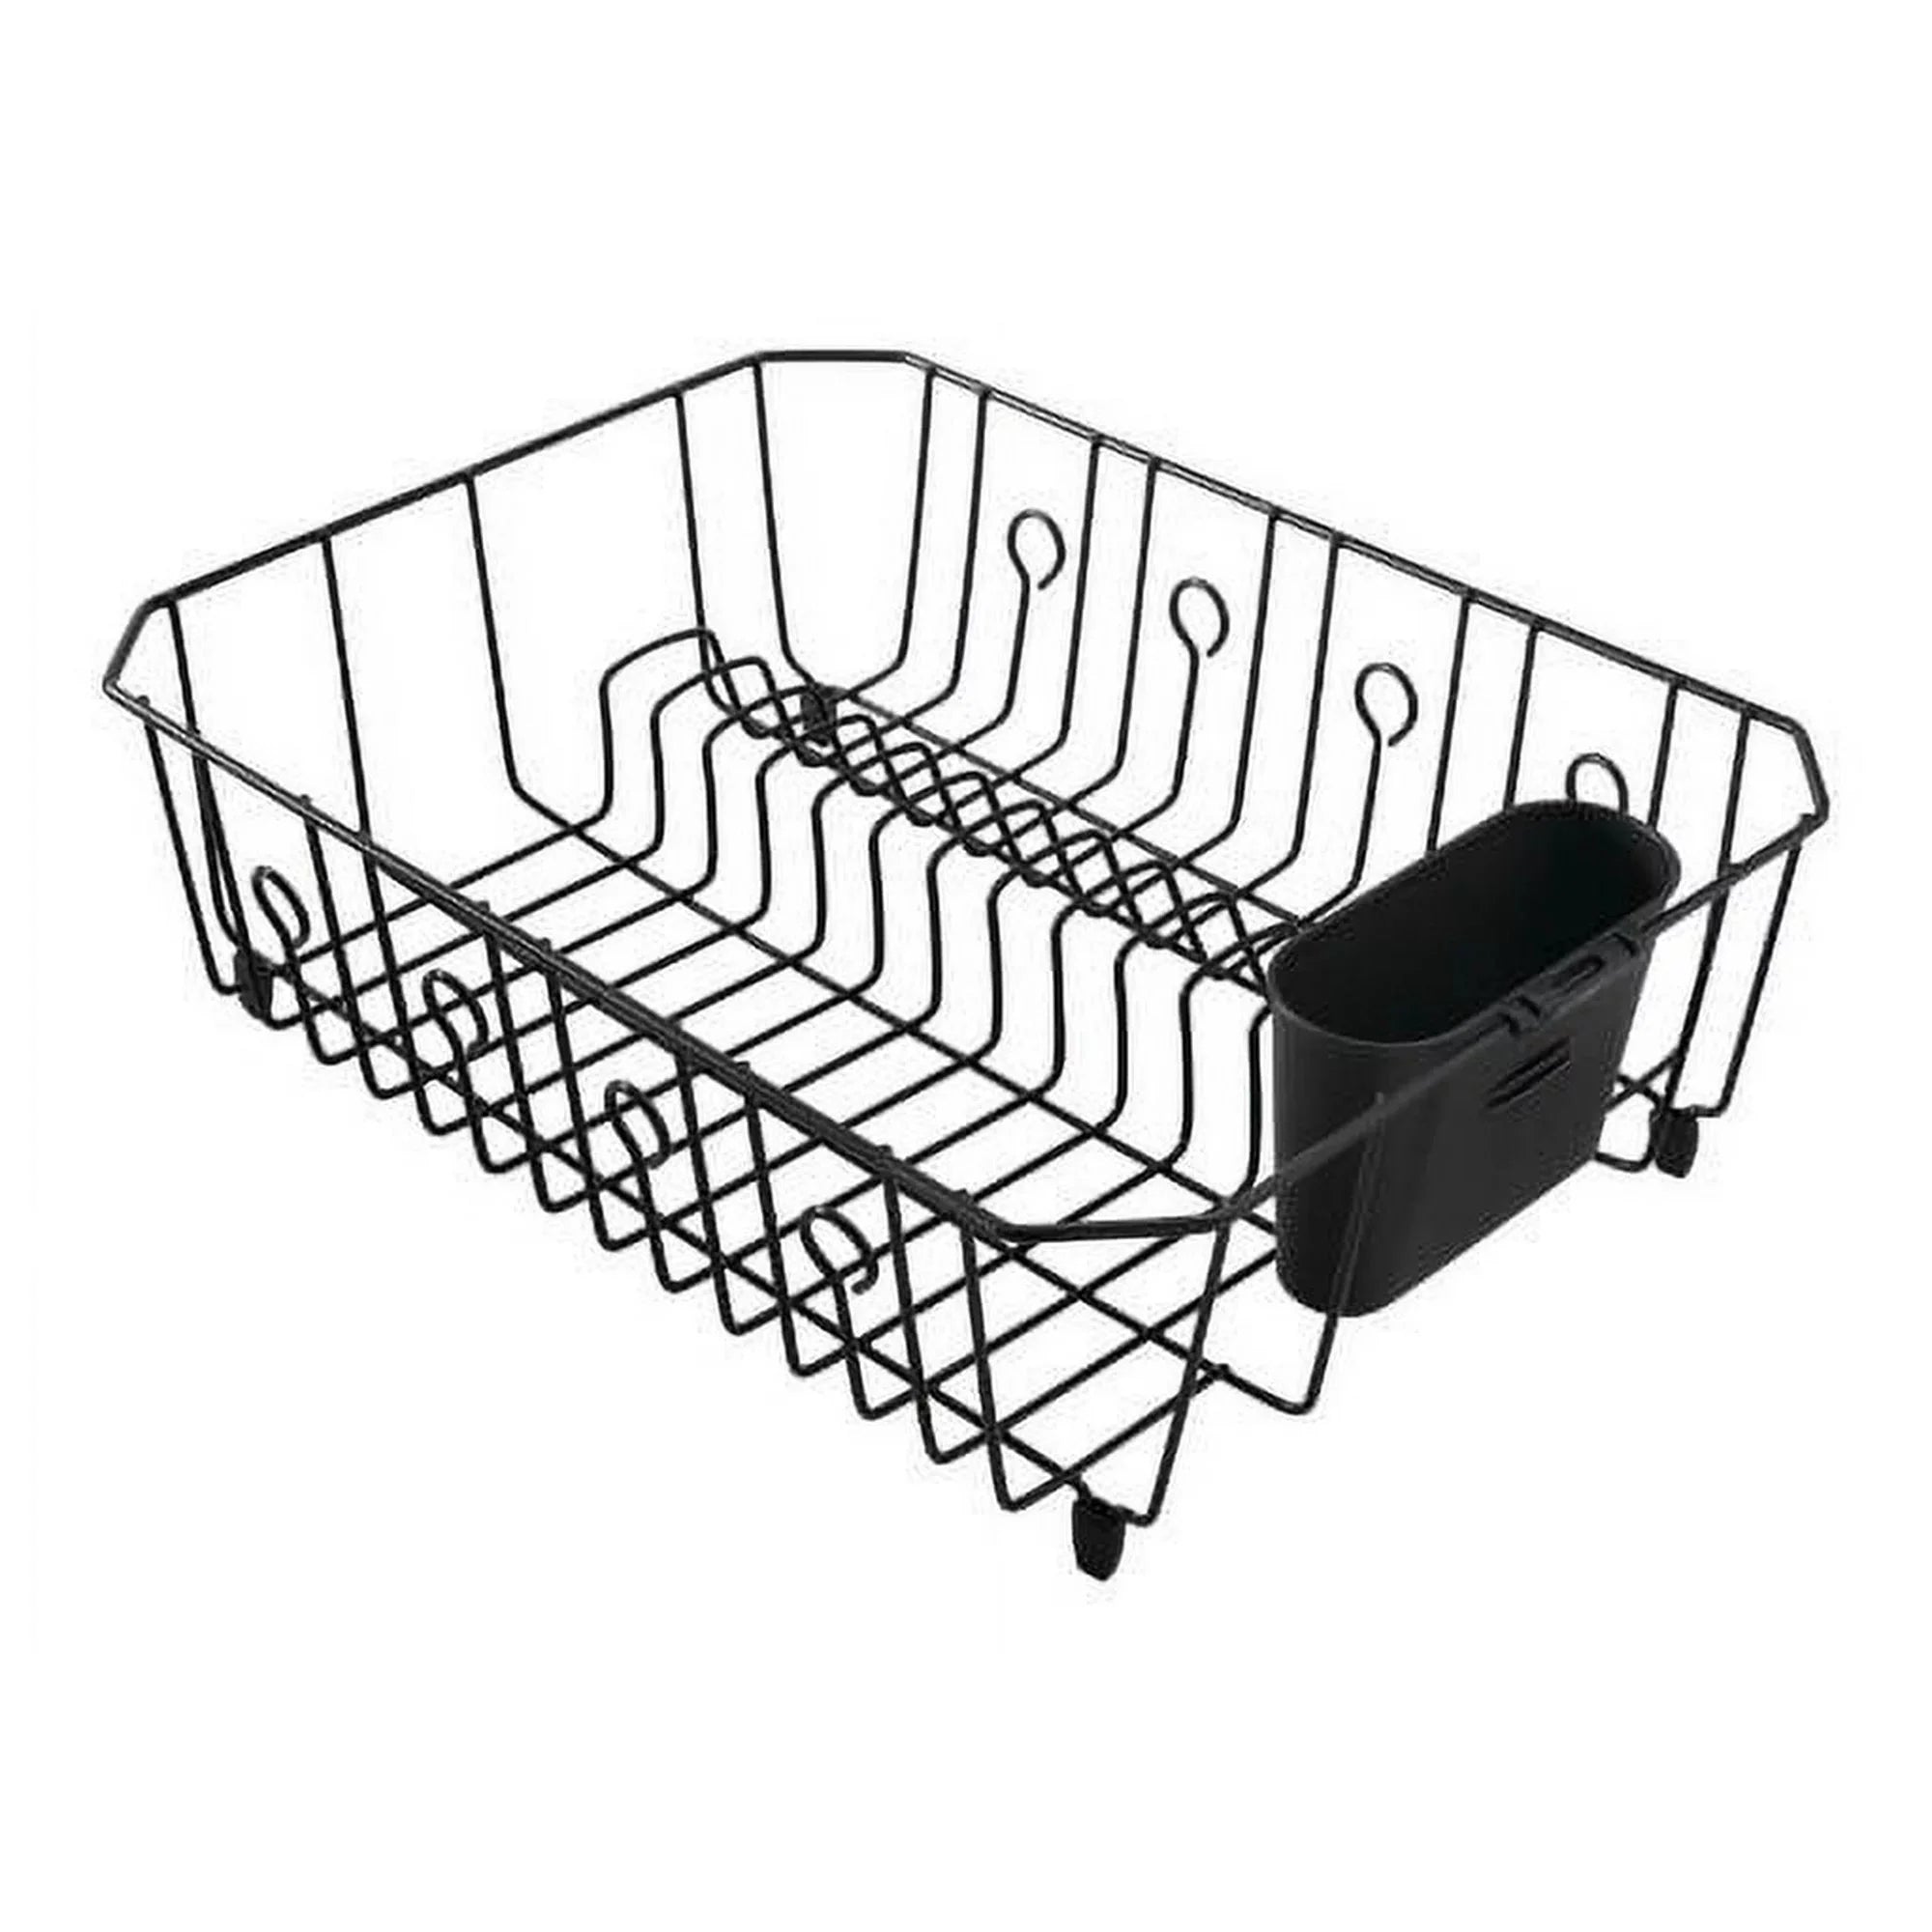 Wholesale prices with free shipping all over United States Rubbermaid Dish Rack with Utensil Holder for Kitchen Countertop, Large, Black - Steven Deals